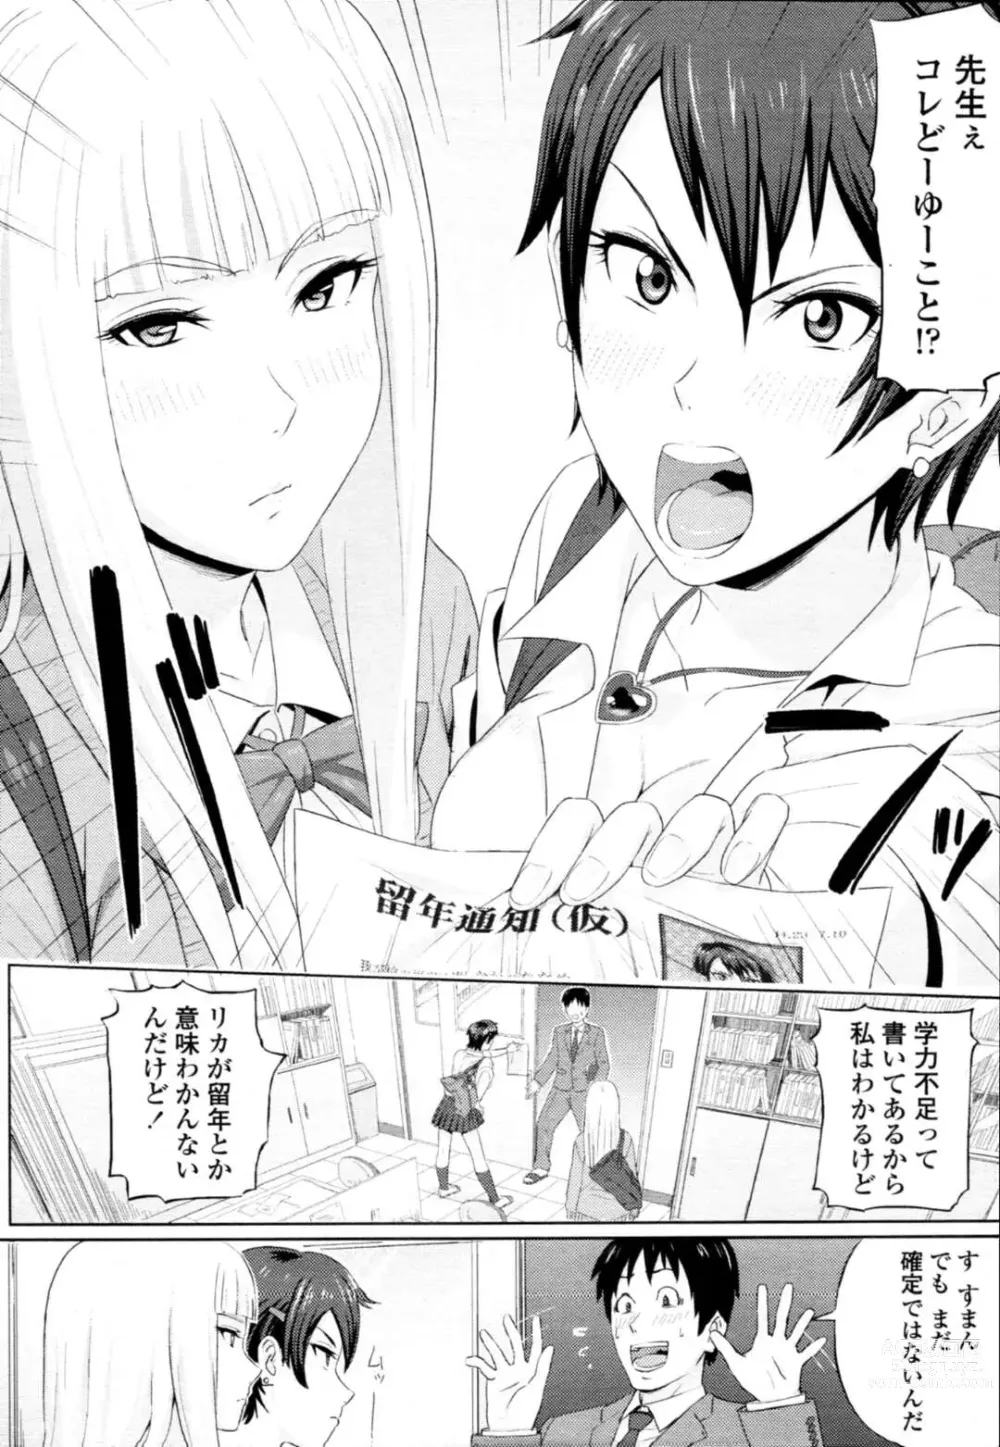 Page 2 of doujinshi Sassy Gal JKs Having Harem Sex with Teachers... Lewd Girls Climax by Letting Him Fuck Them Vaginally and Anally!